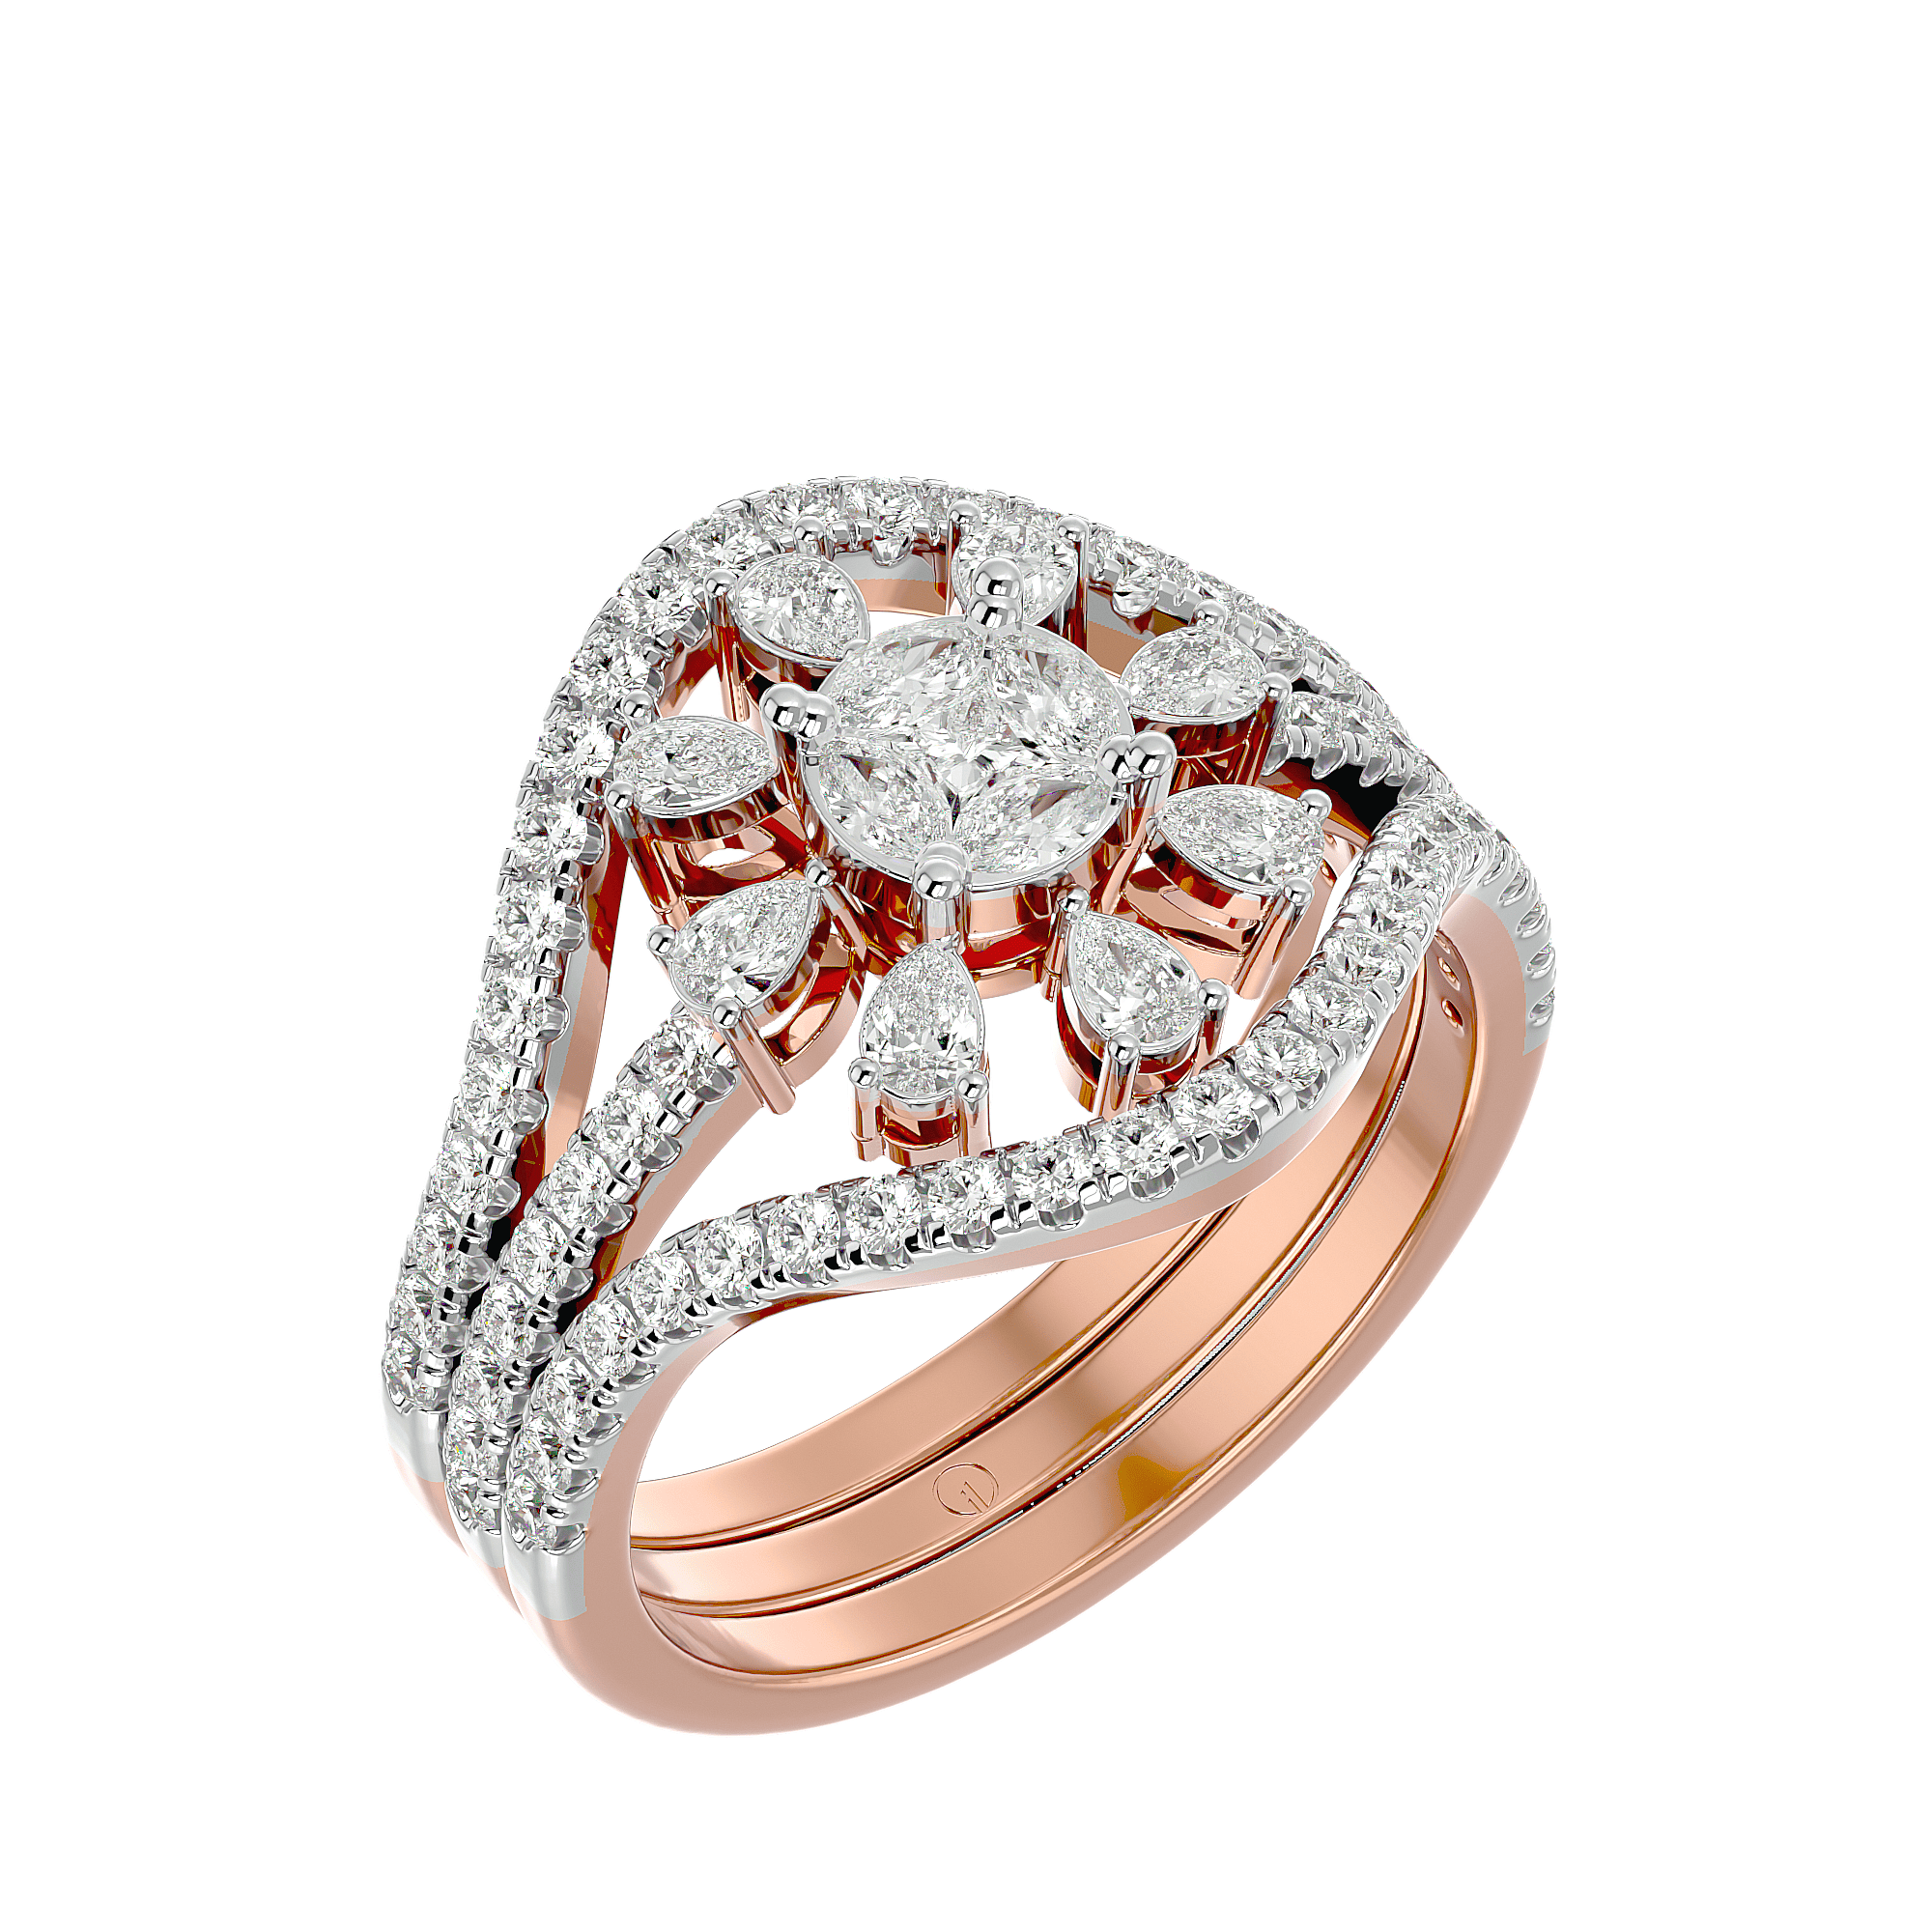 Sparkling-Beauty-Solitaire-Illusion-Diamond-Ring-RG2121A-View-01